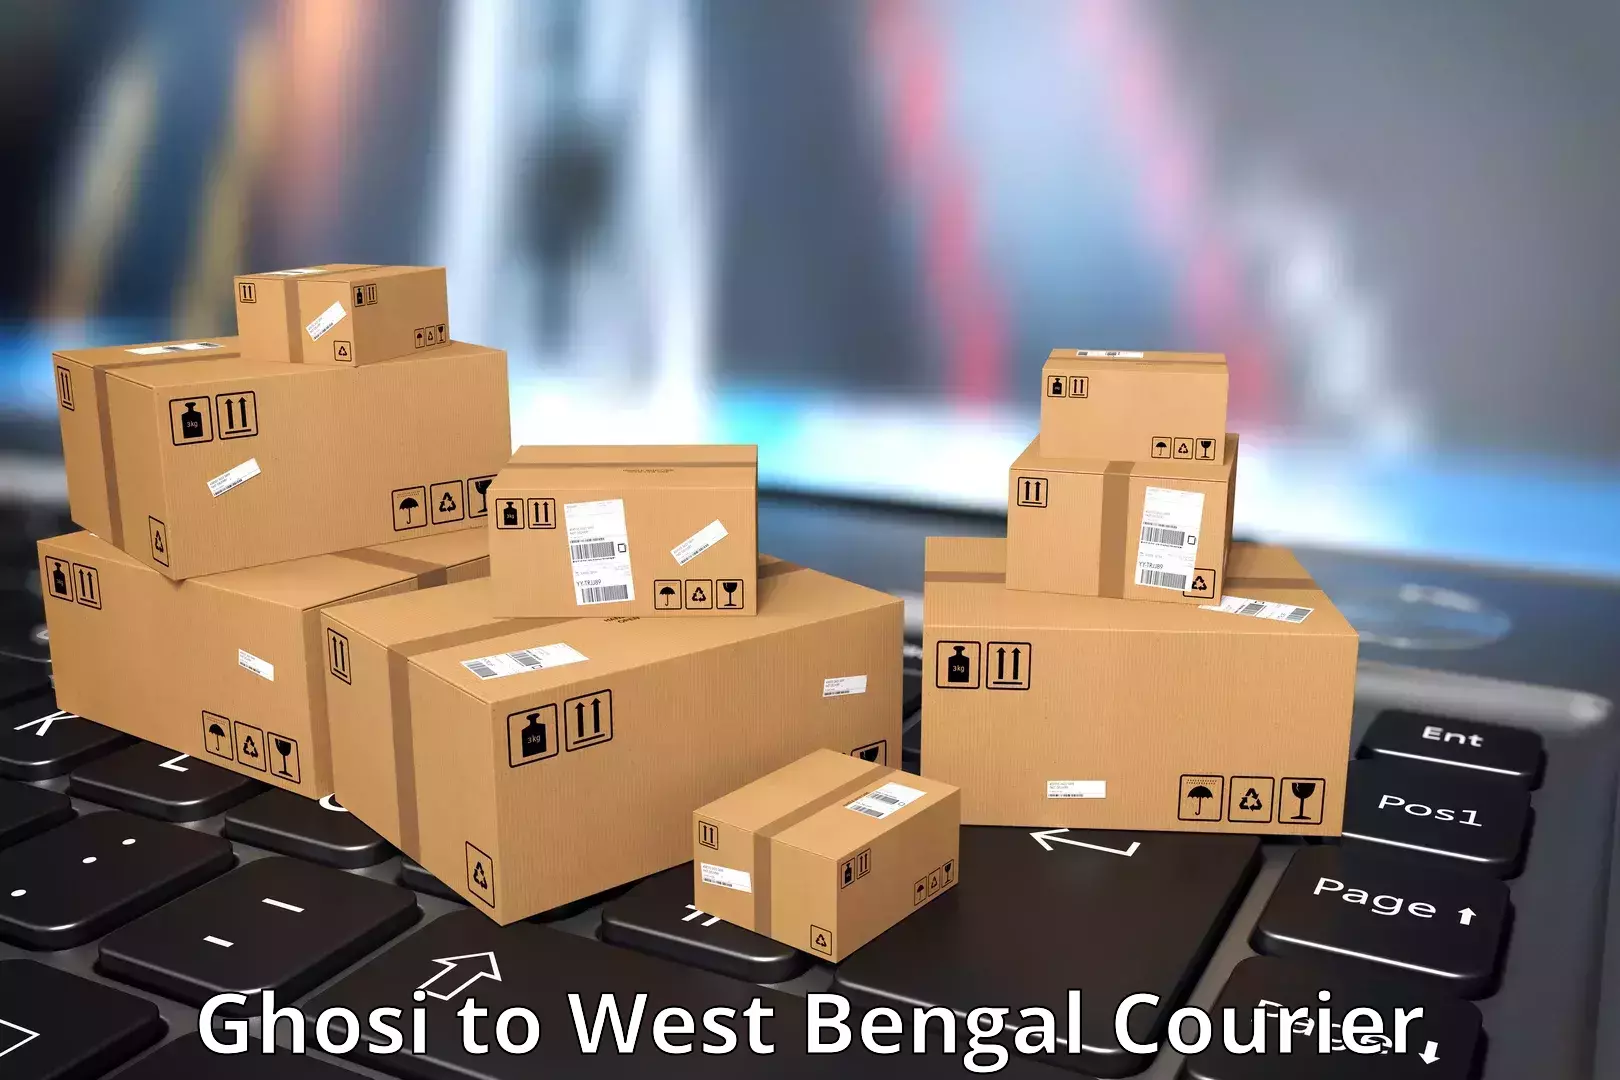 International parcel service Ghosi to West Bengal